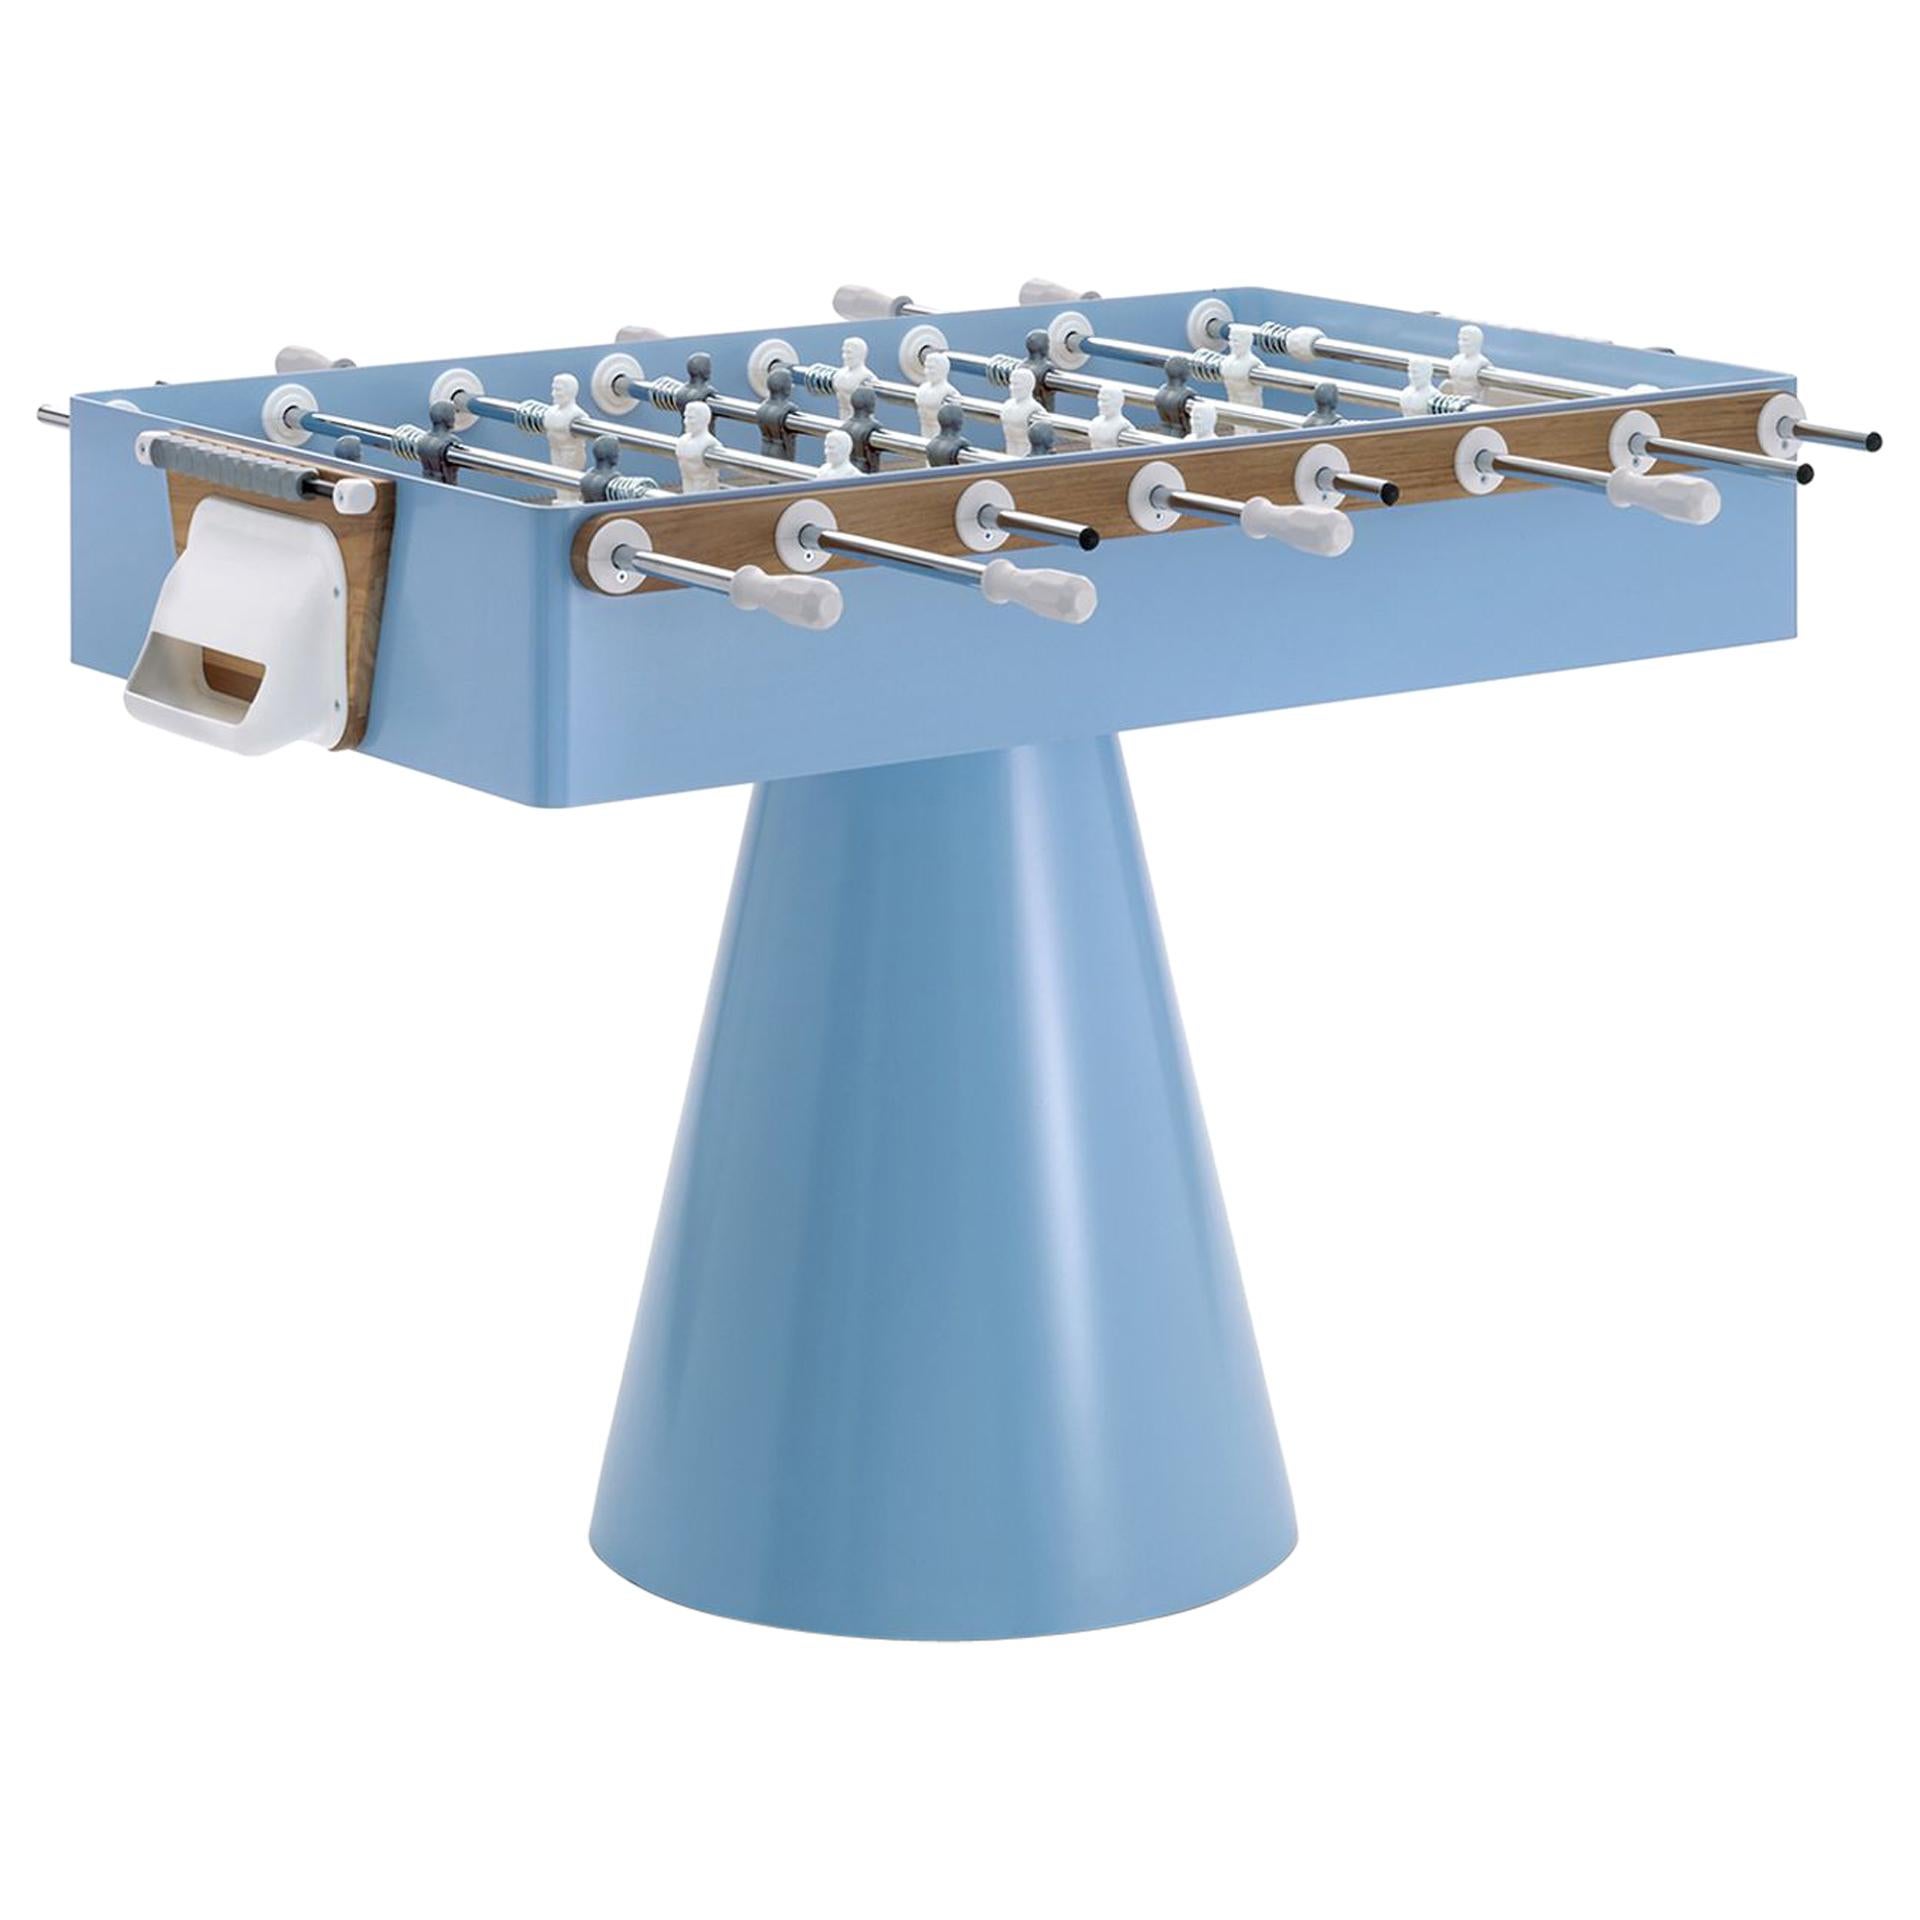 Modern Football Table in Light Blue Capri Iron and Wood Outdoor Indoor